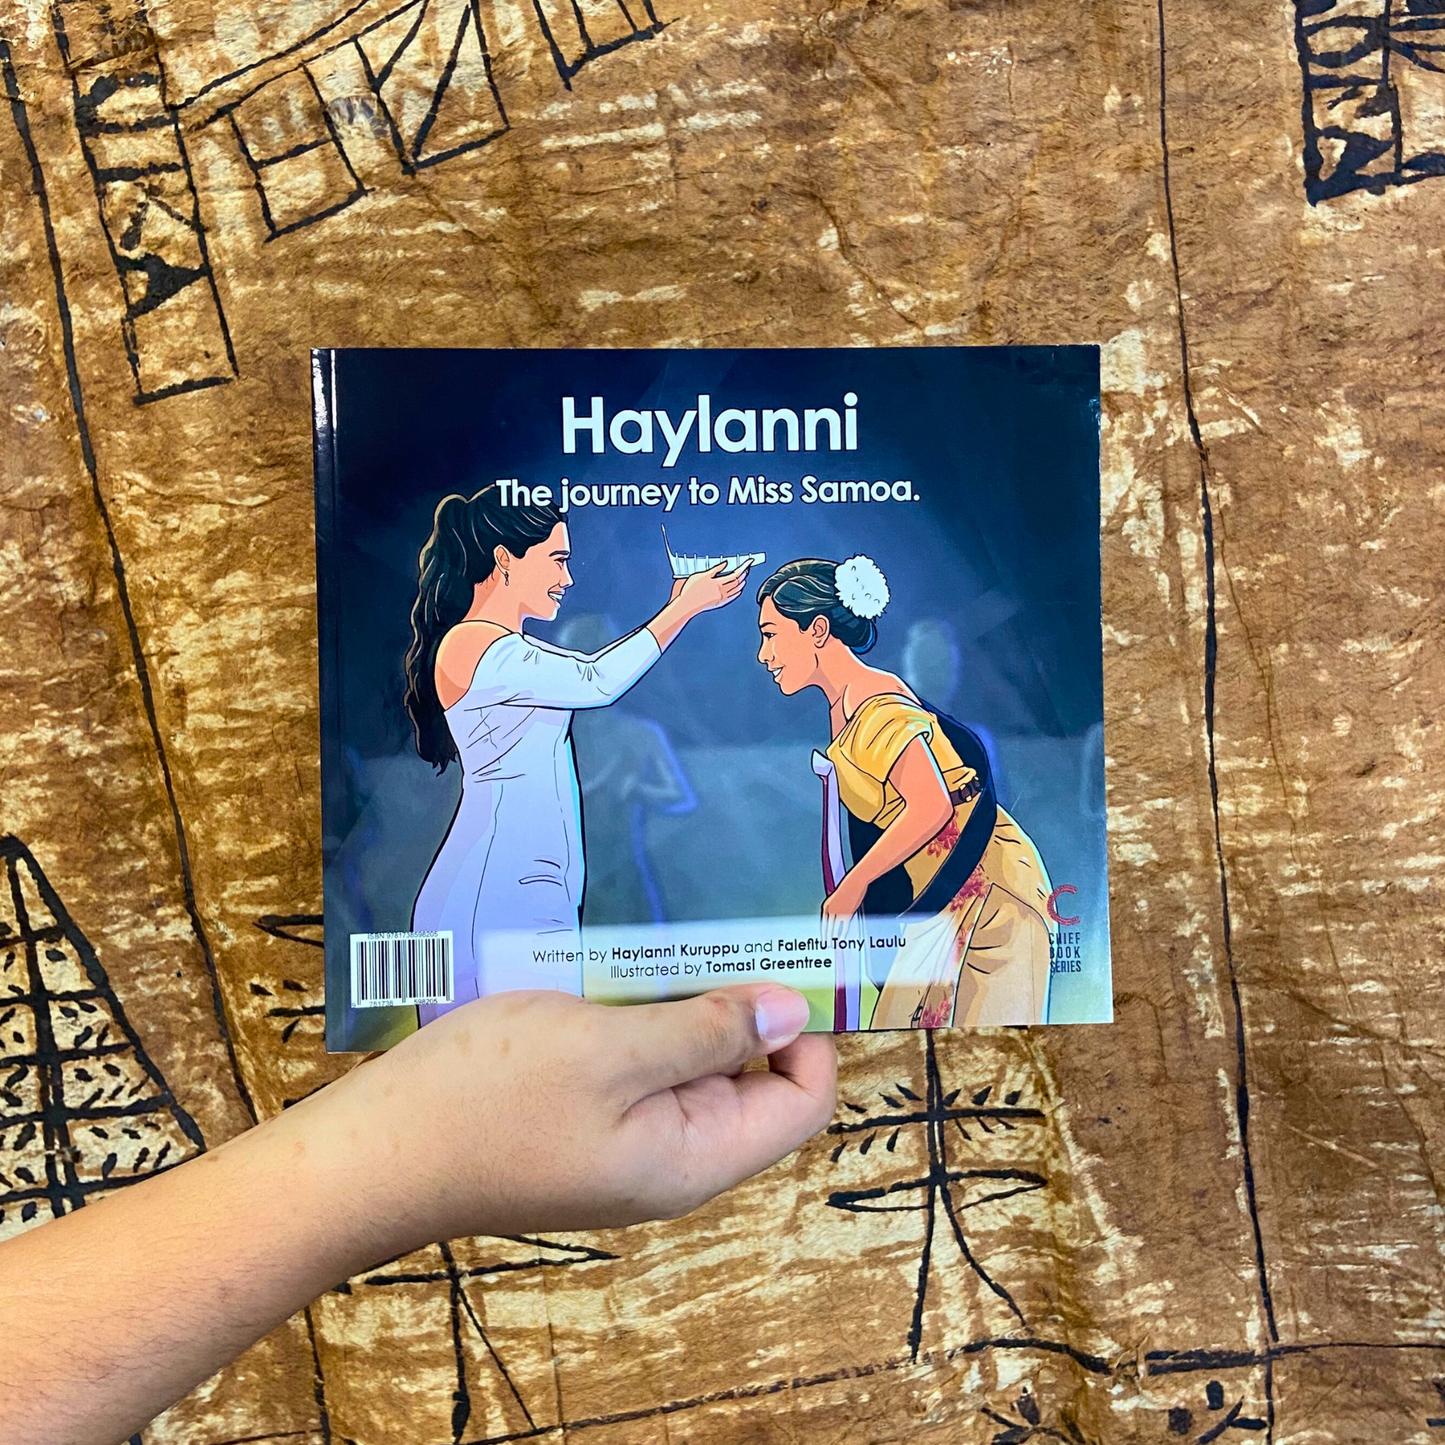 A hand model holding a bilingual Samoan children's book titled "Haylanni: The Journey to Miss Samoa". The book is an illustration of a Fonoifafo Miss Samoa 2019-2021 crowning Haylanni as the new reigning Miss Samoa 2022-2023.